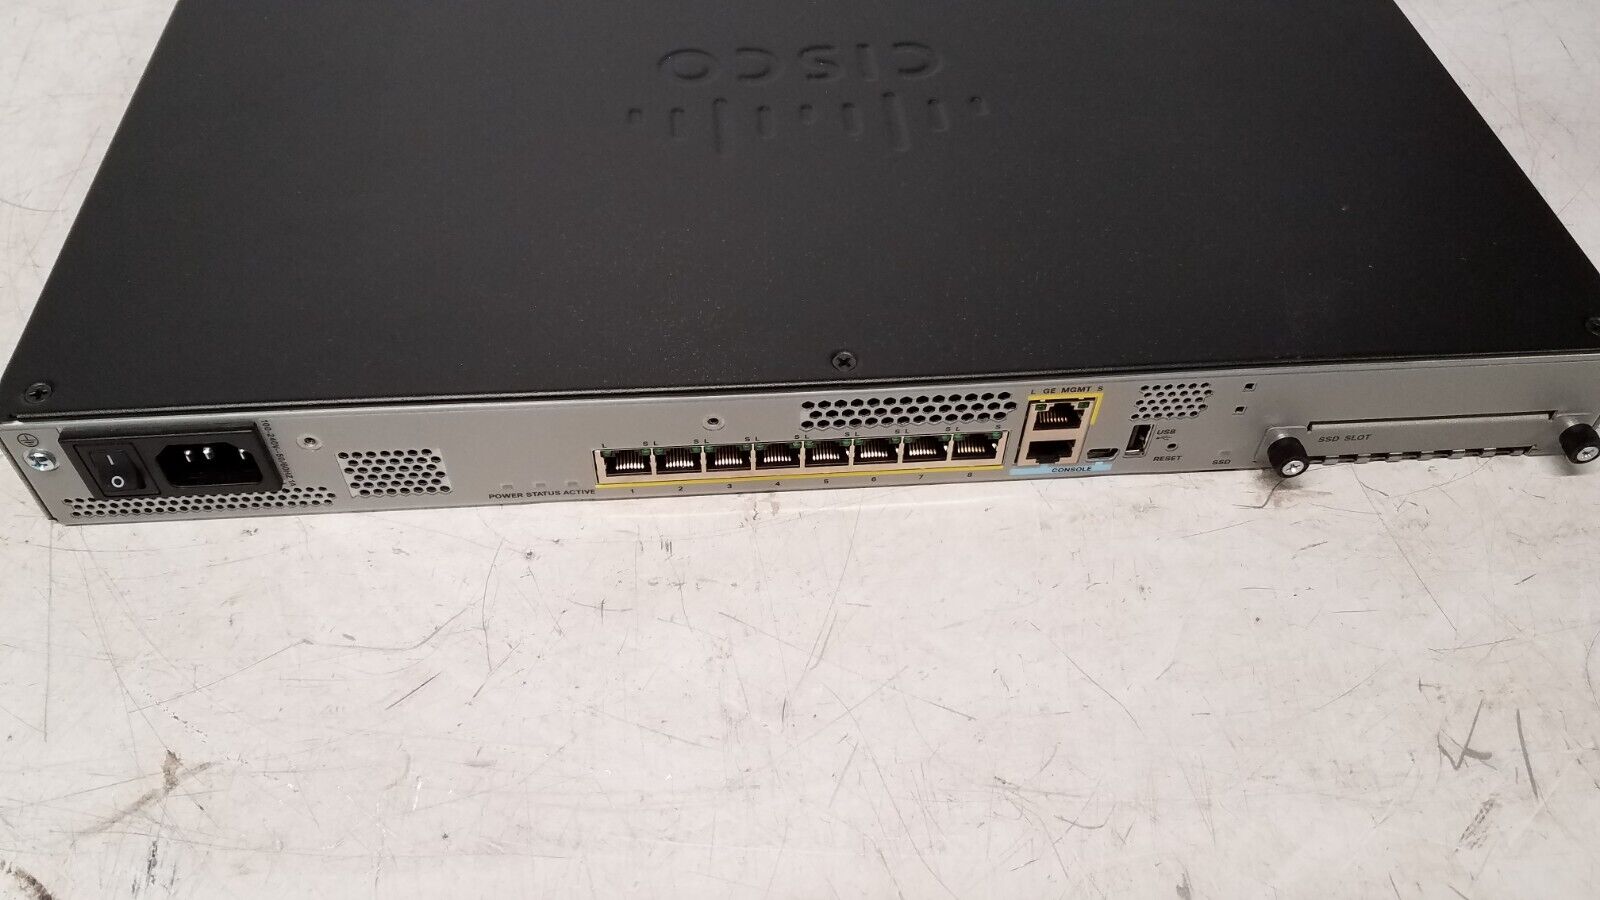 Cisco ASA 5508-X Hardware Firewall UNTESTED, AS-IS